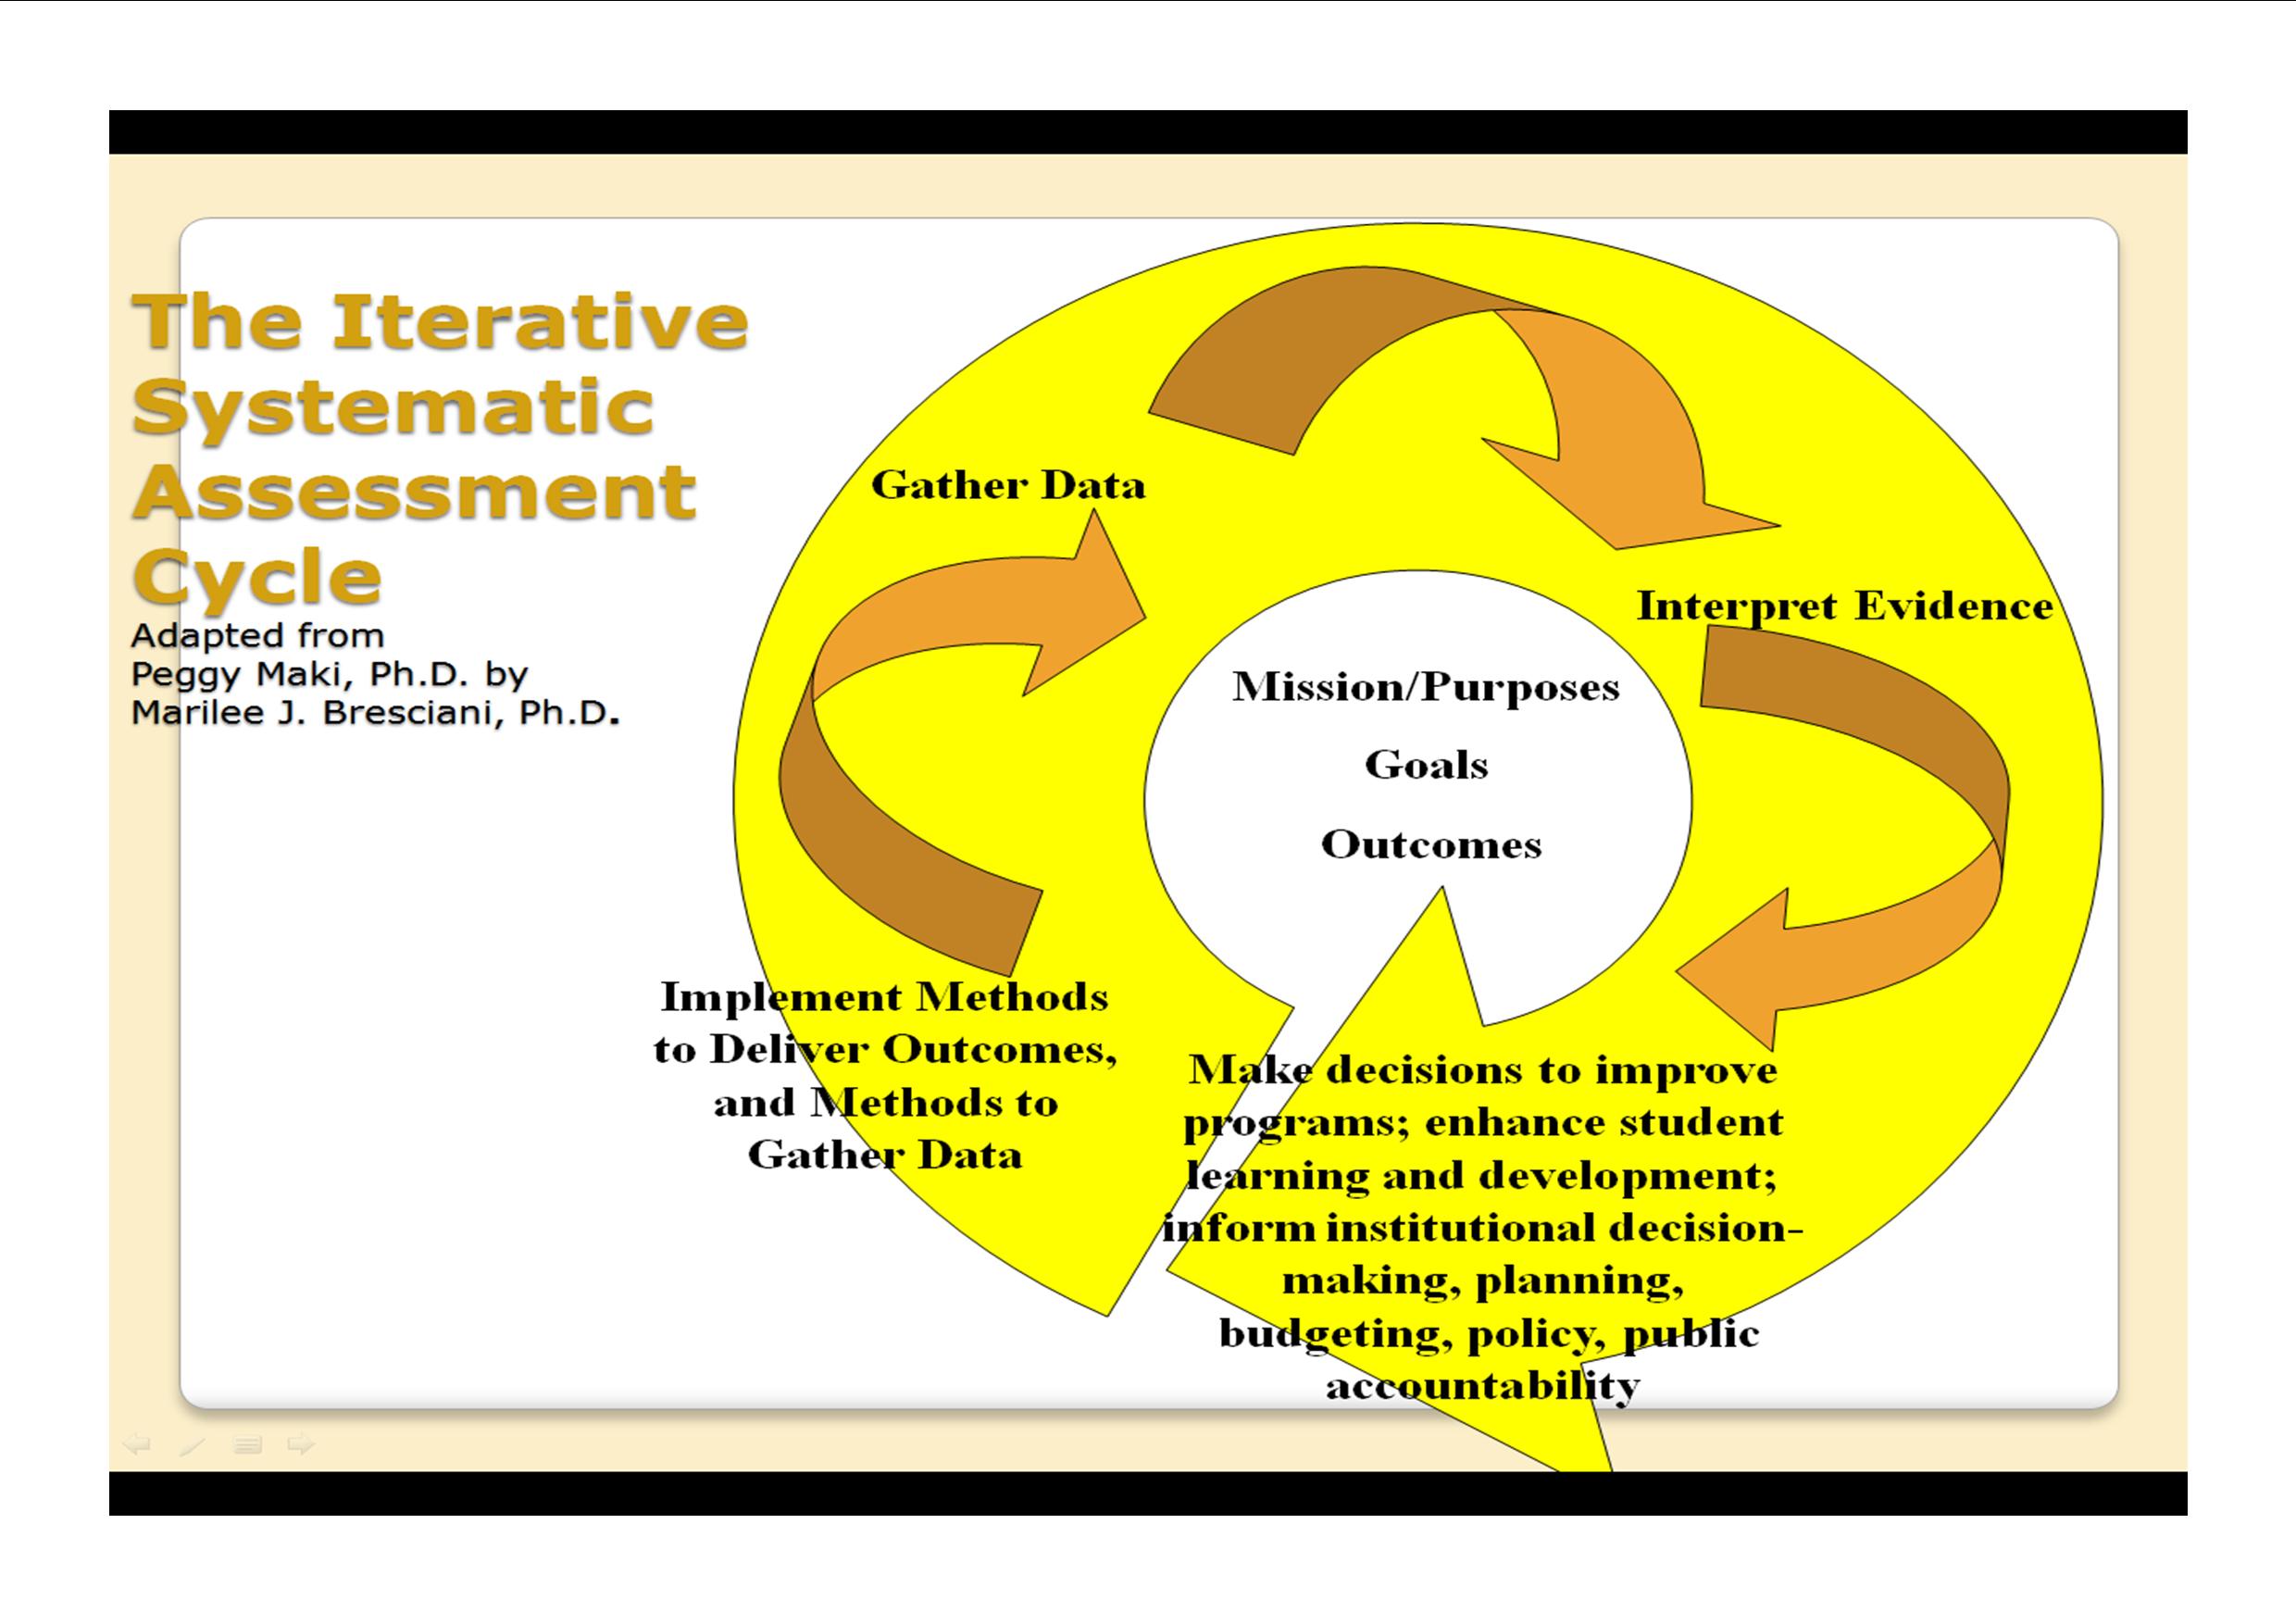 Assessment Cycle